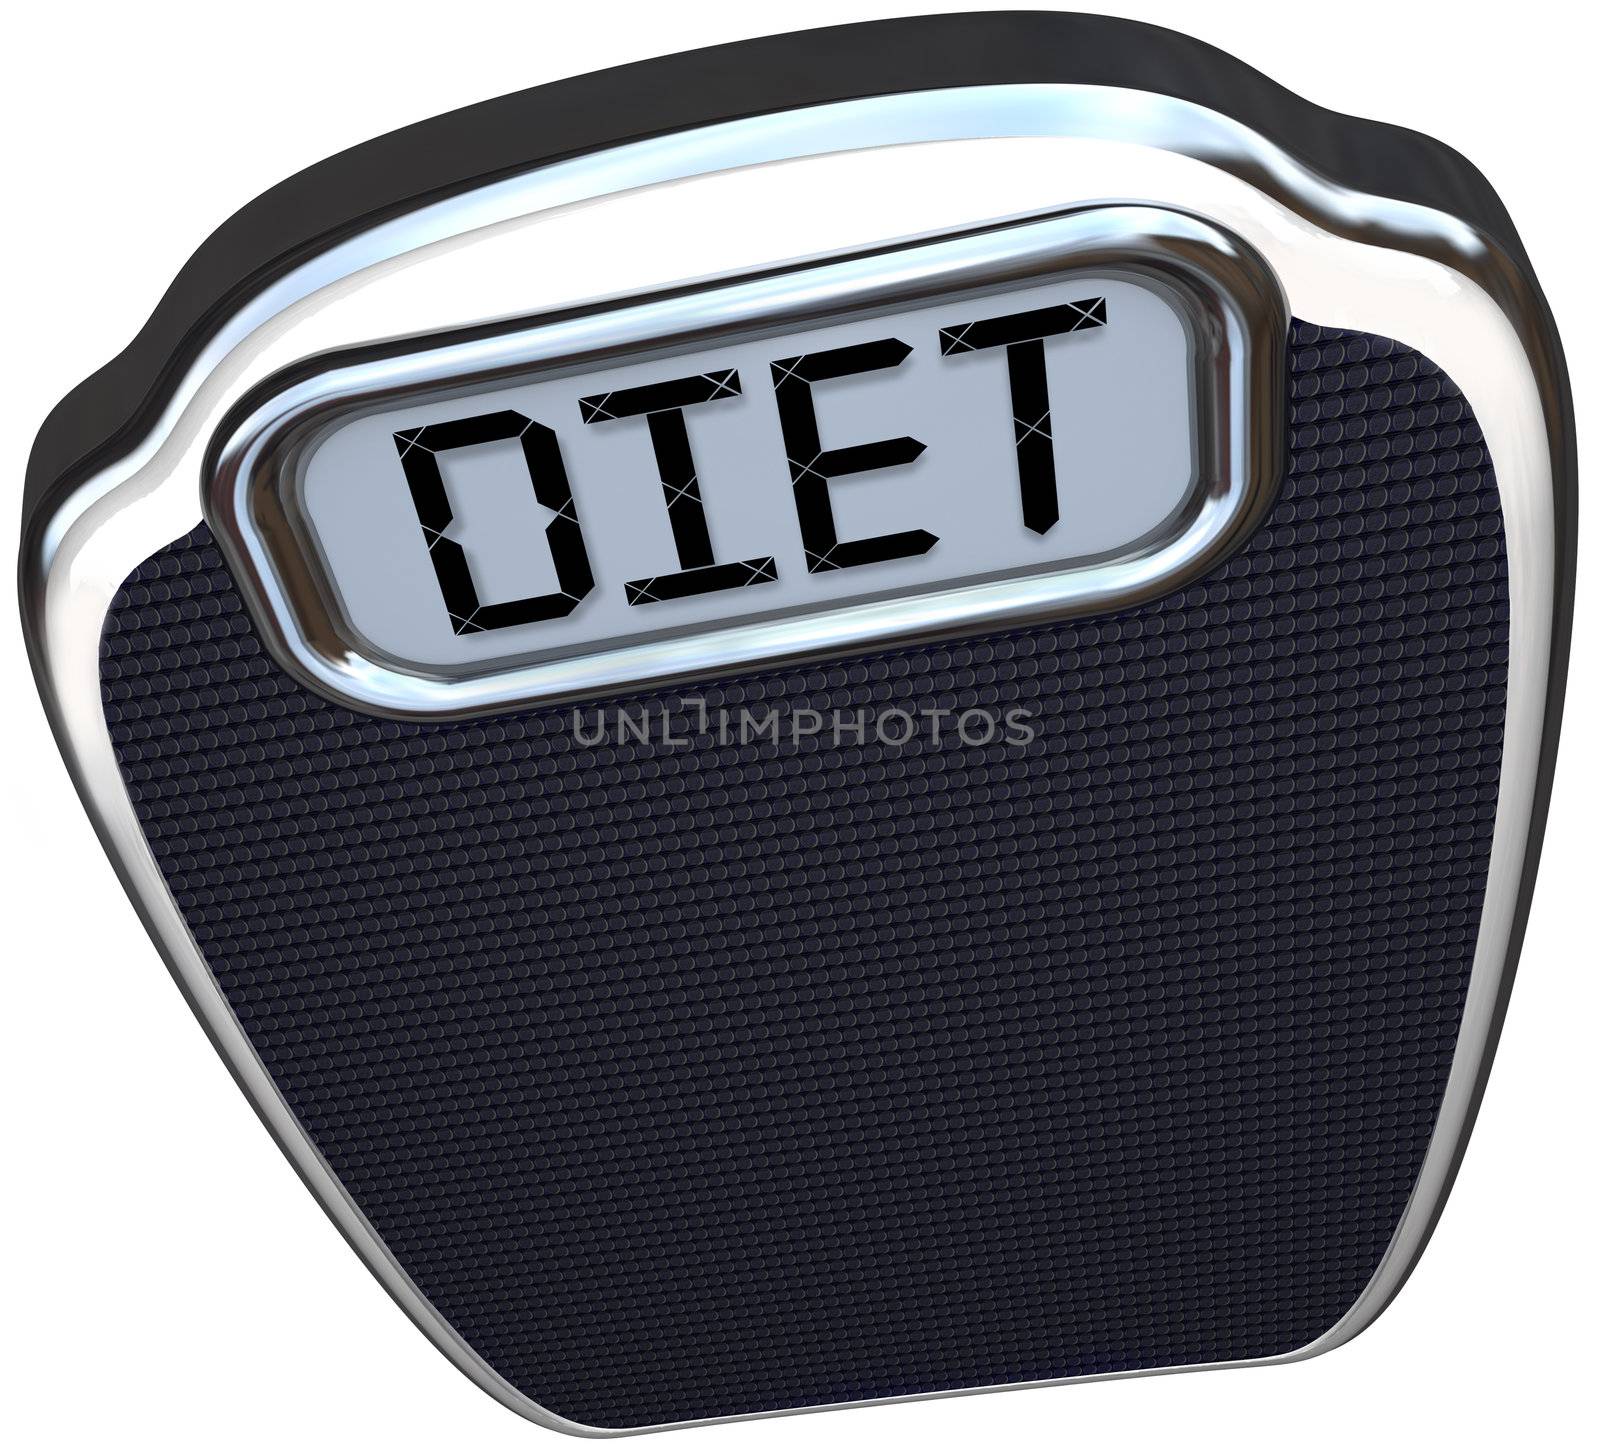 The word Diet on a scale to illustrate the need to eat less and lose weight for better health